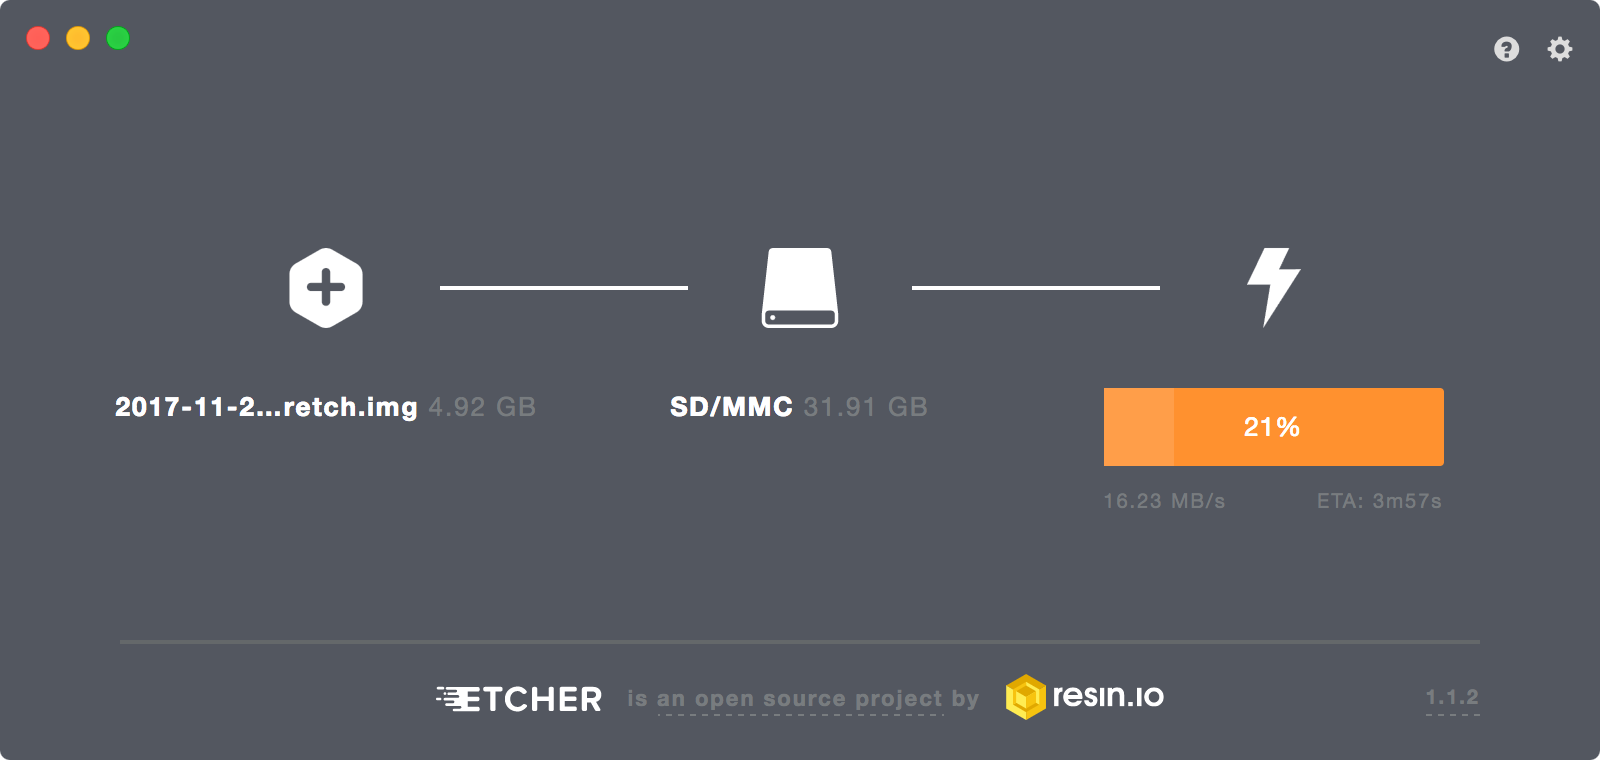 imaging the SD card with Etcher